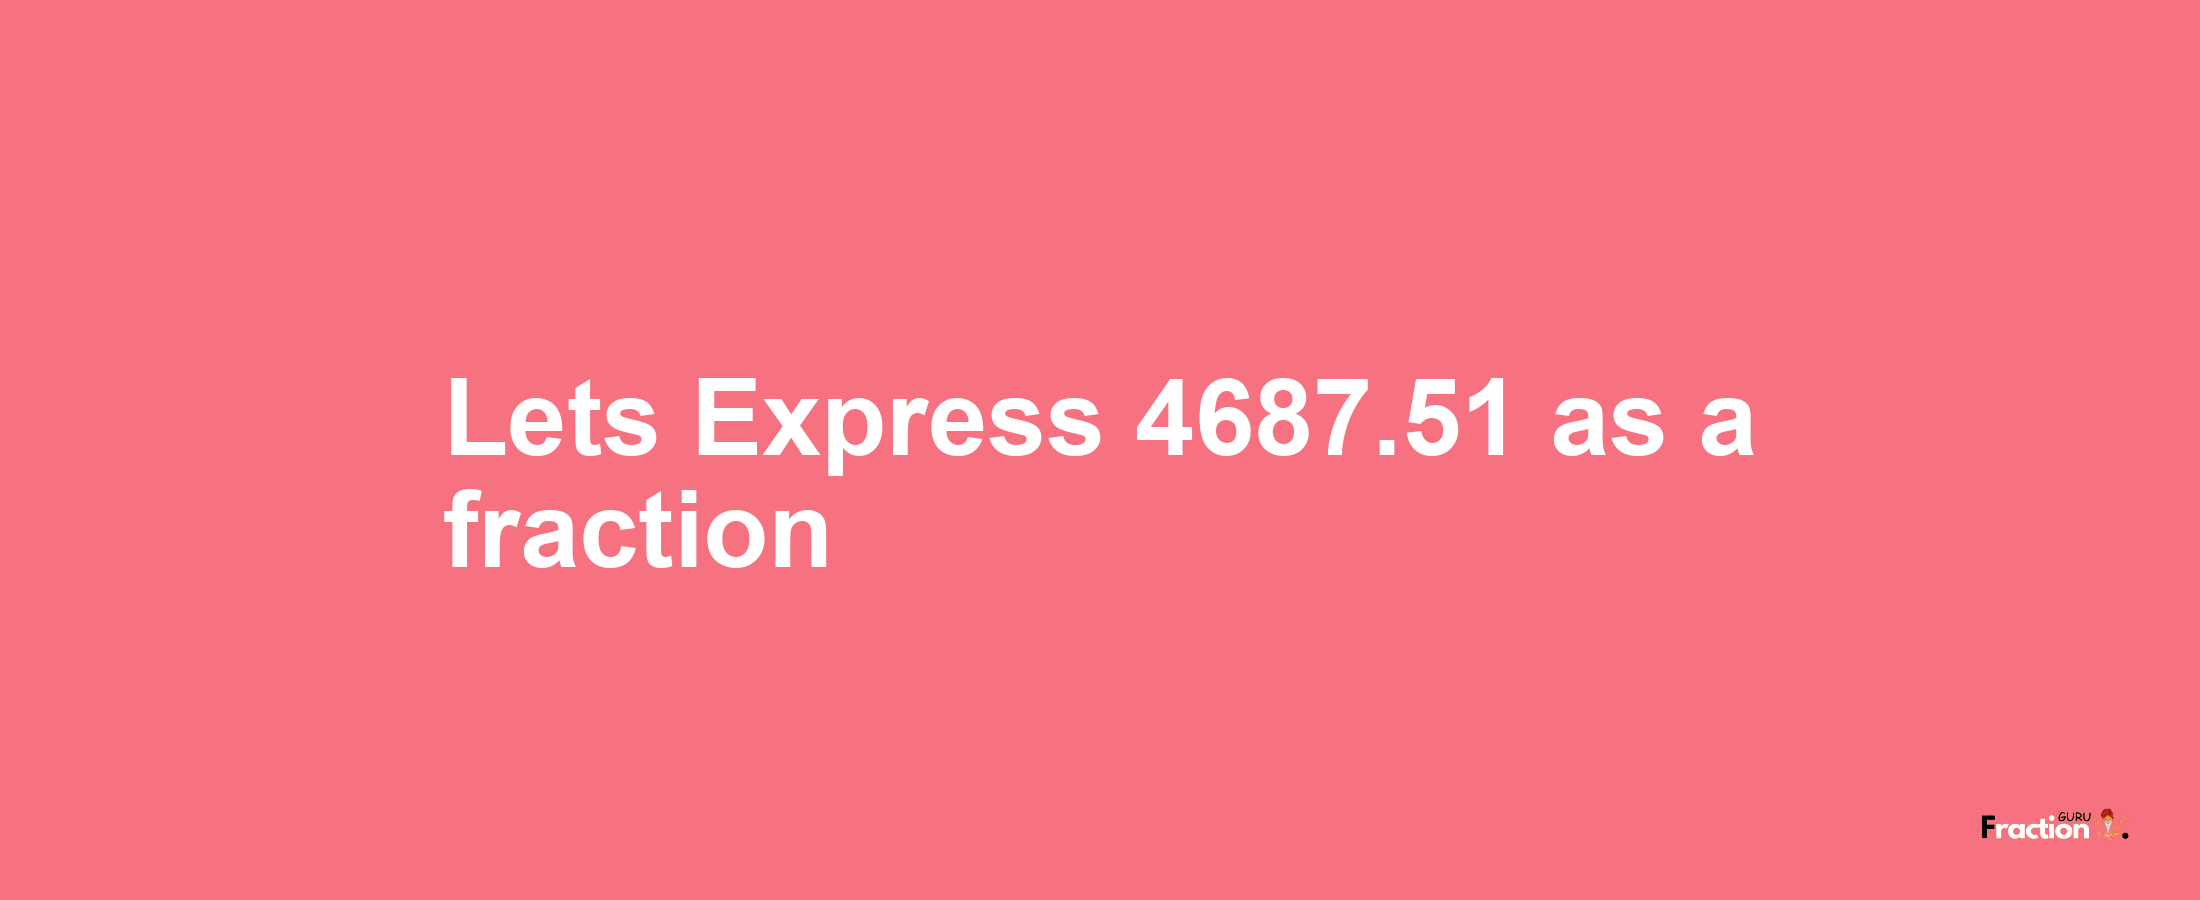 Lets Express 4687.51 as afraction